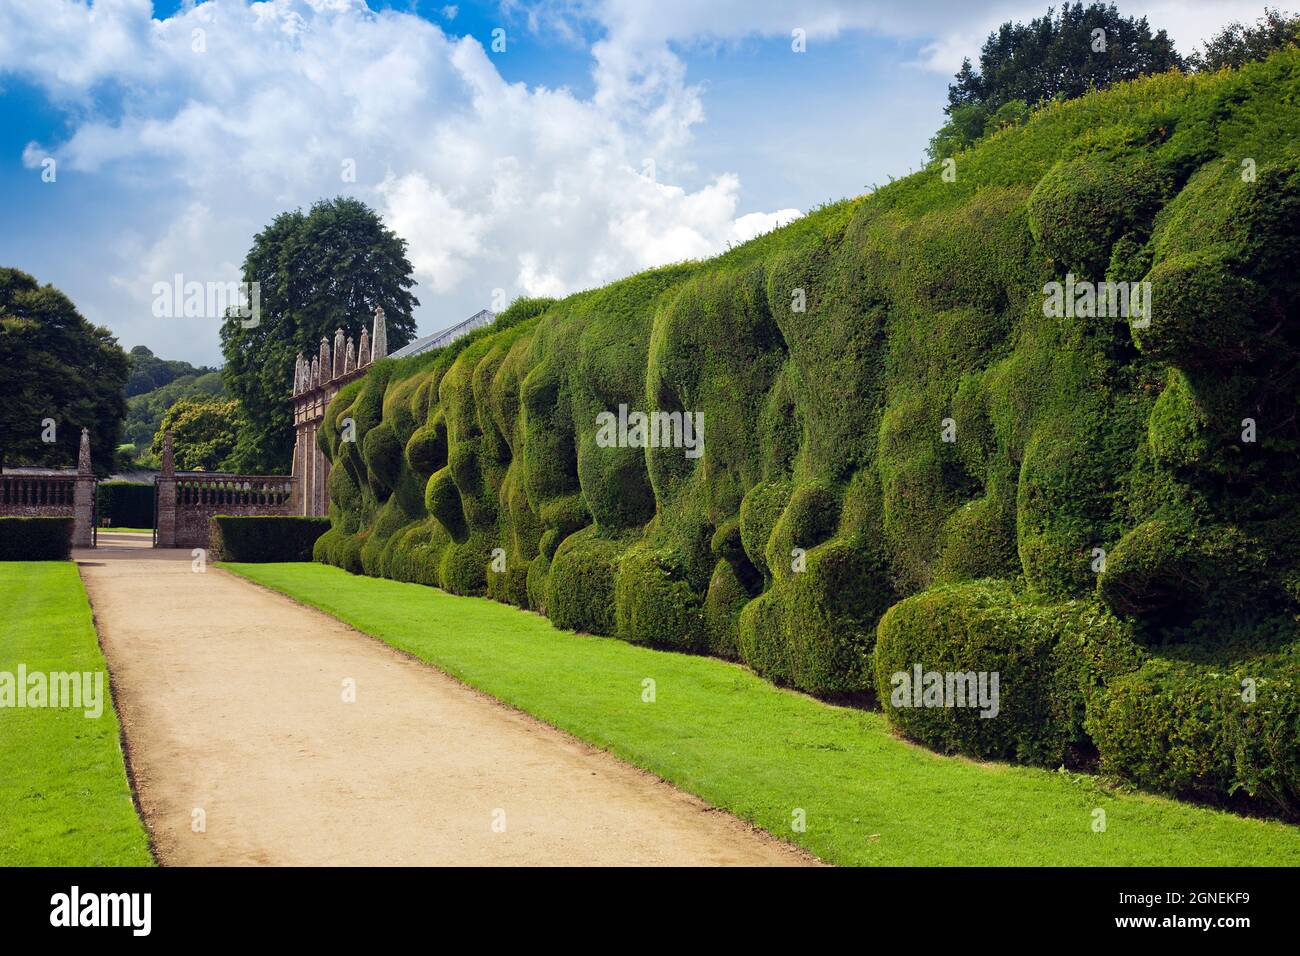 Interesting organic growth patterns in the yew hedge at Montacute House, an Elizabethan mansion with garden near Yeovil, Somerset, England, UK Stock Photo